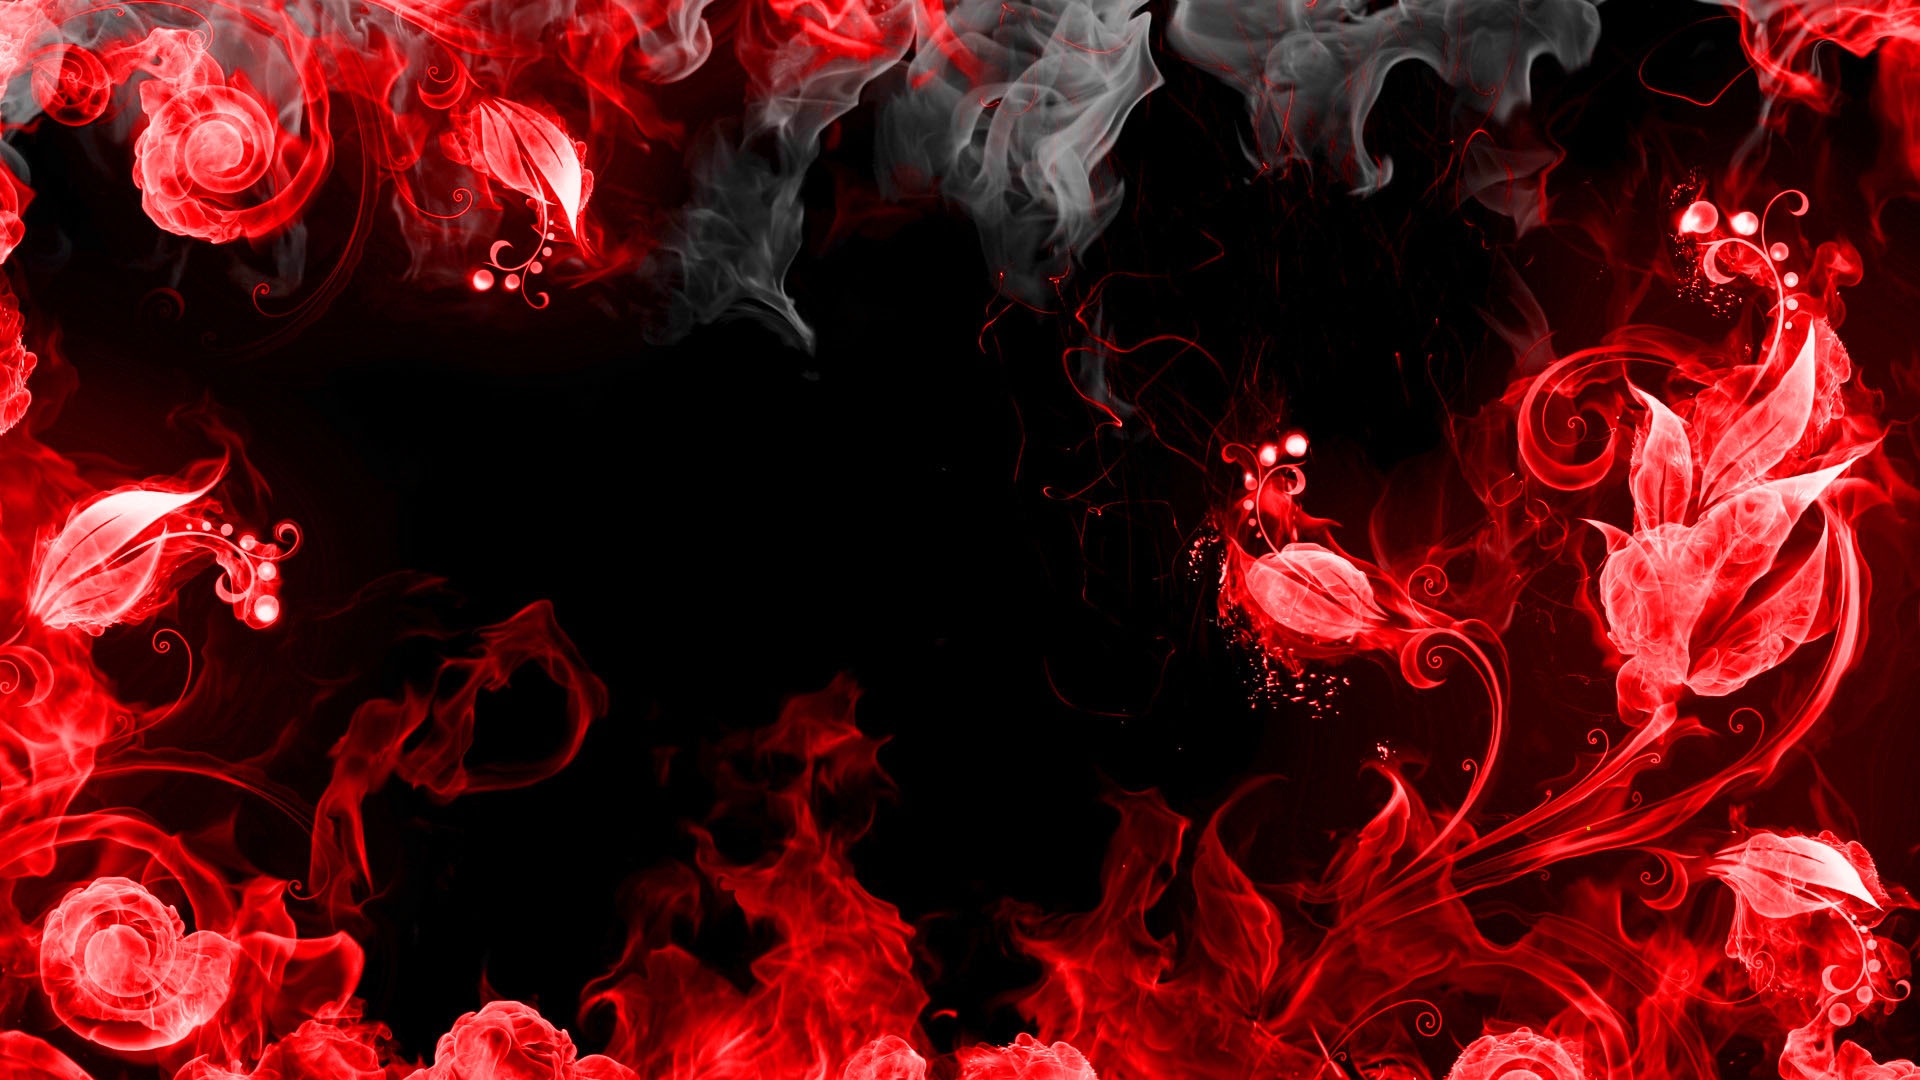 Download Wallpaper 1920x1080 abstraction, red, smoke, black Full HD ...